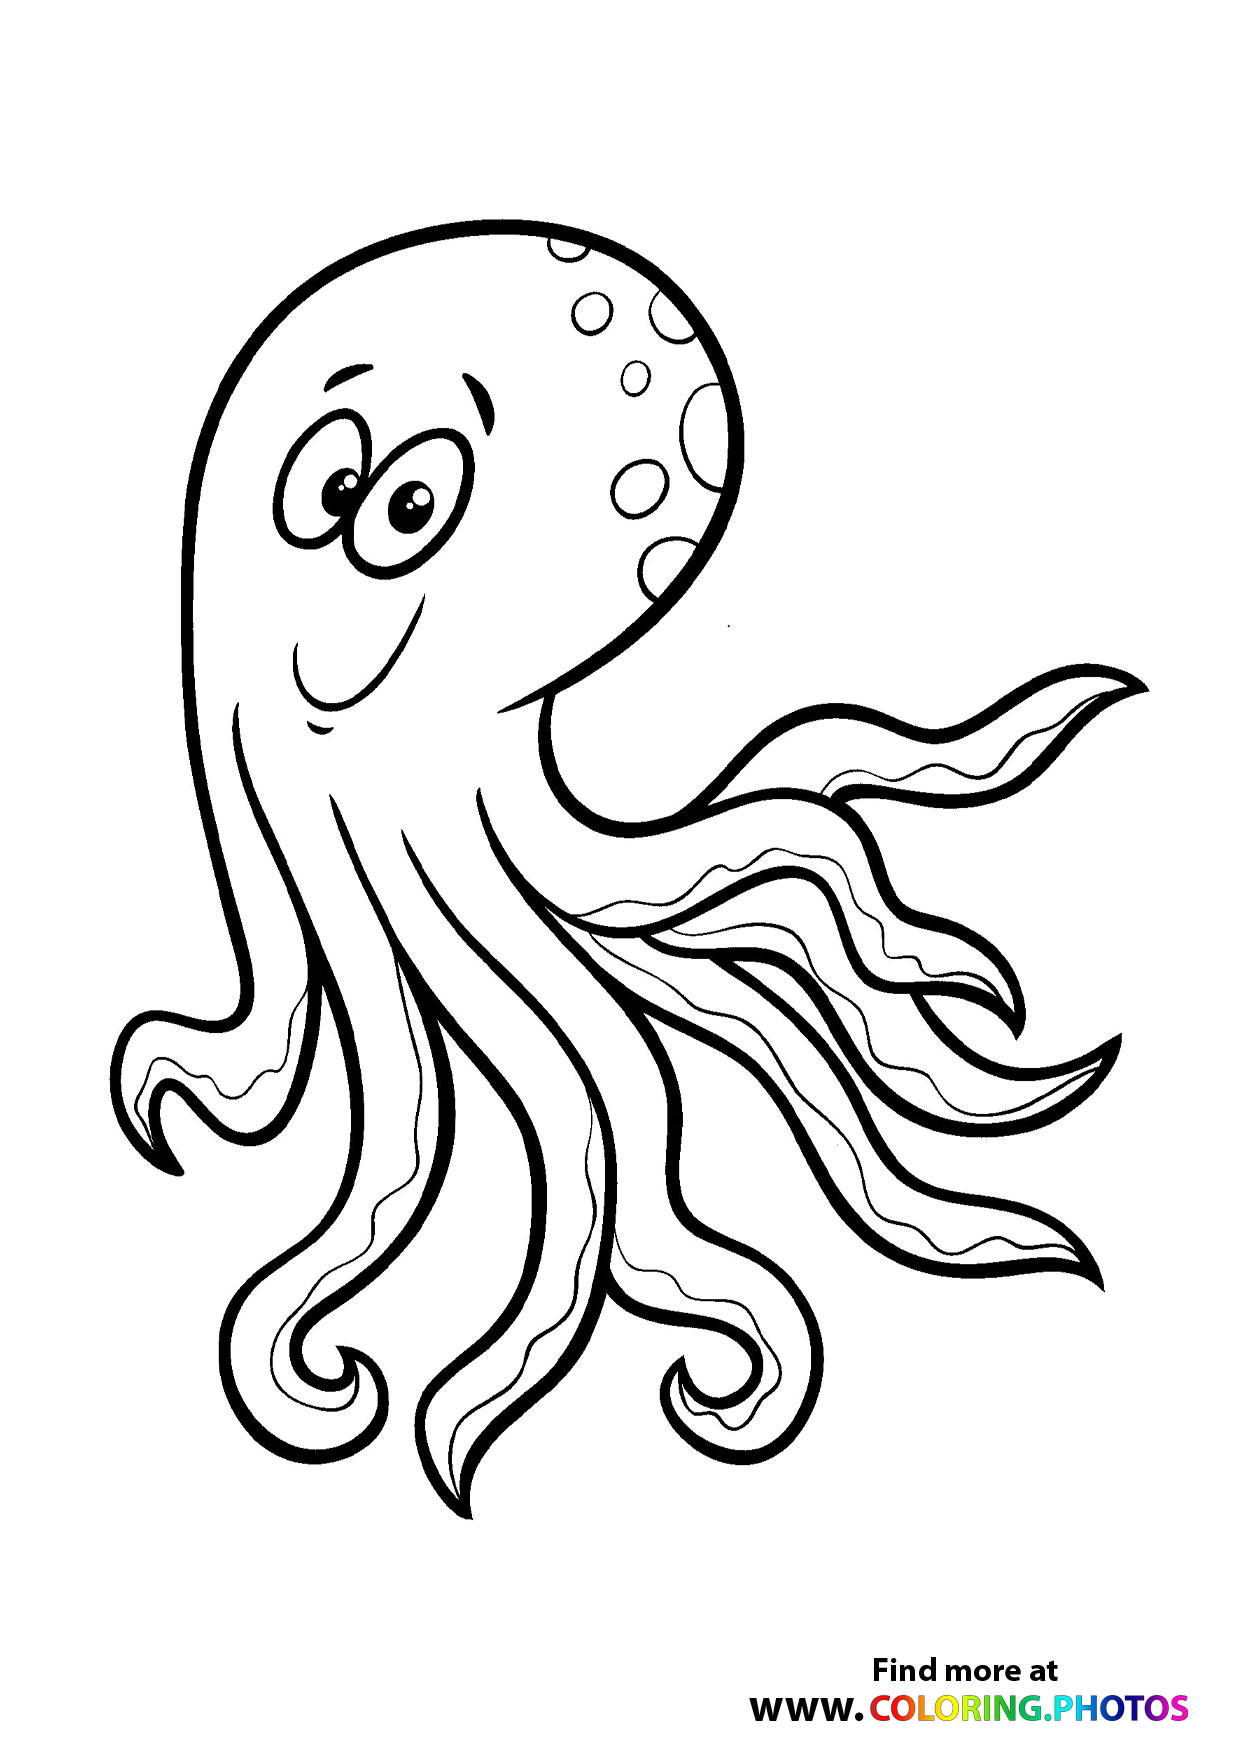 Octopus with dots - Coloring Pages for kids